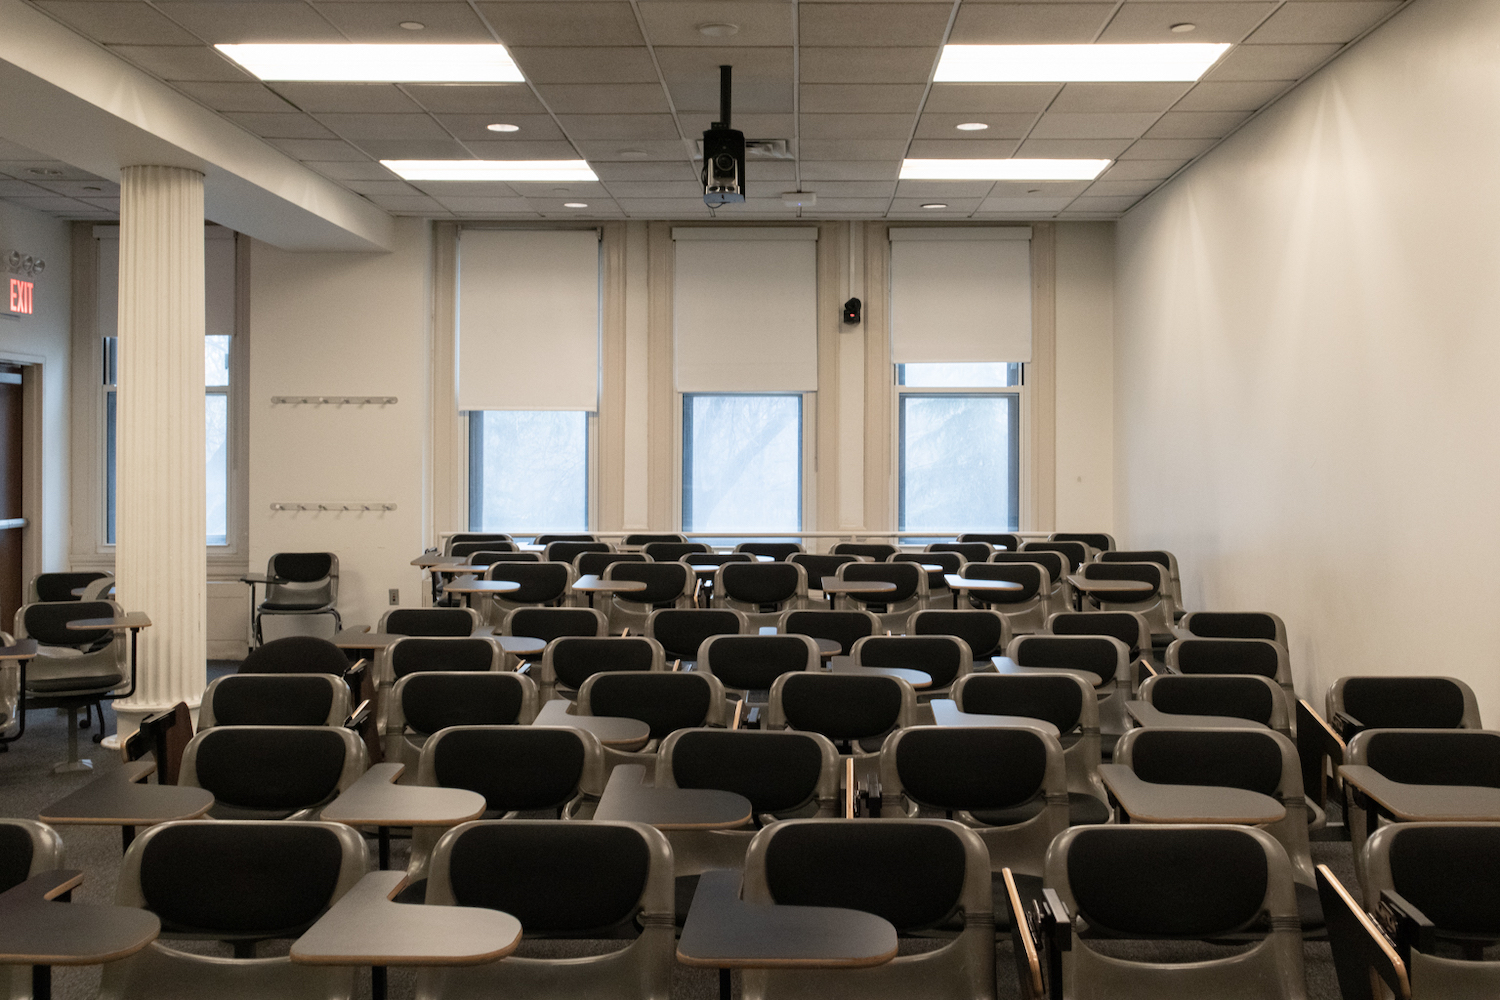 A photo of a classroom out of session, filled with unoccupied chairs.